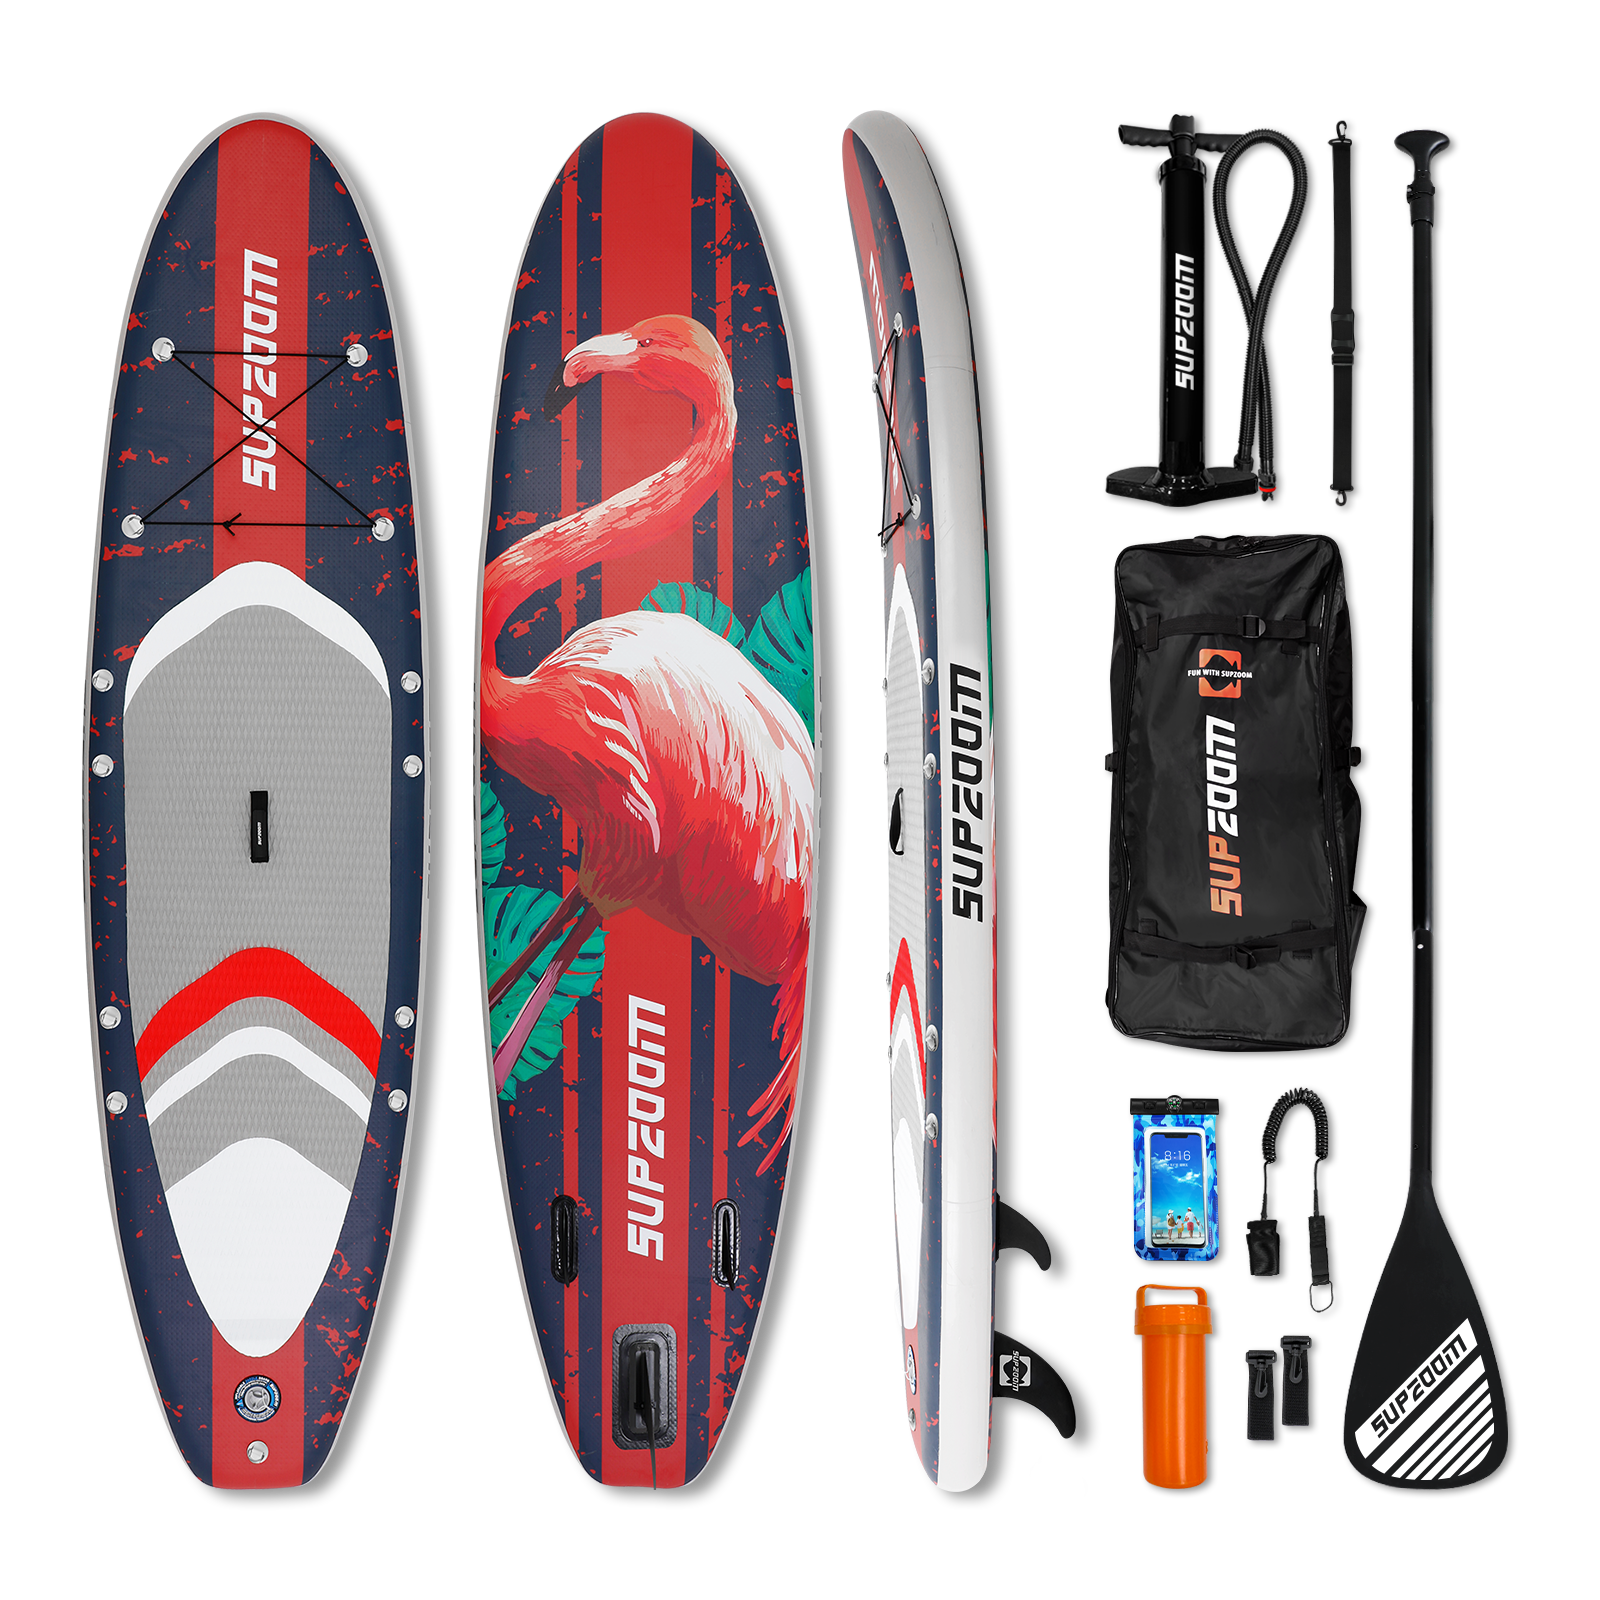 All round 10'6" inflatable stand up paddle board | Supzoom flamingo style